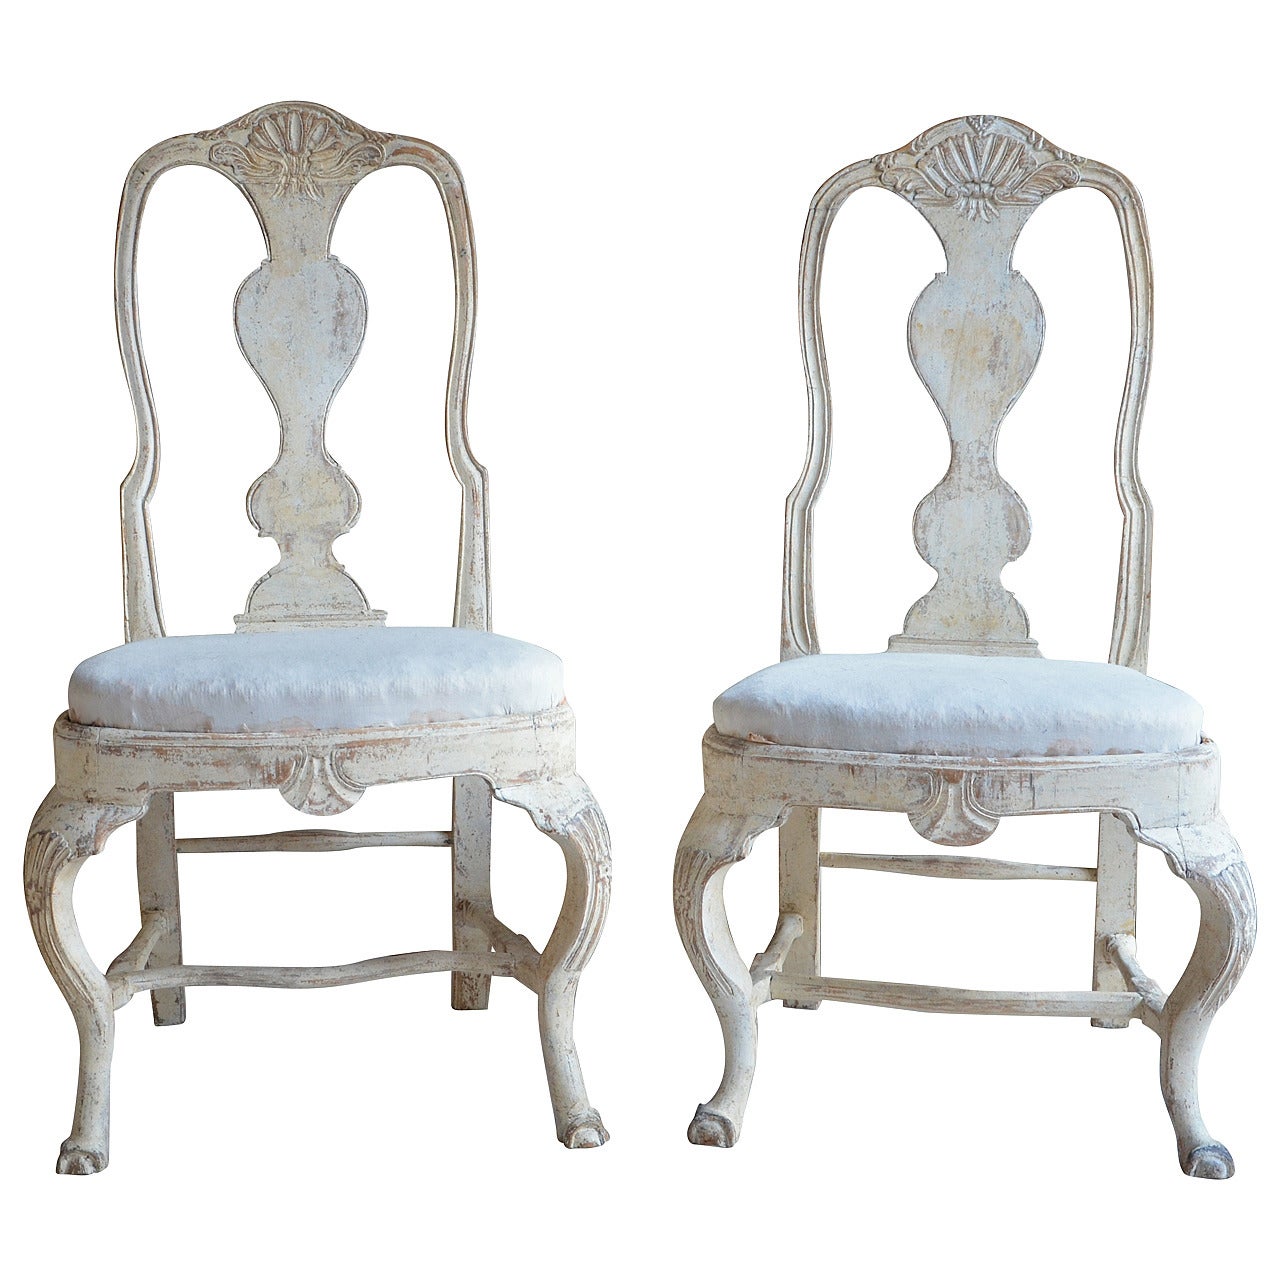 Pair of Swedish Rococo Chairs with Original paint